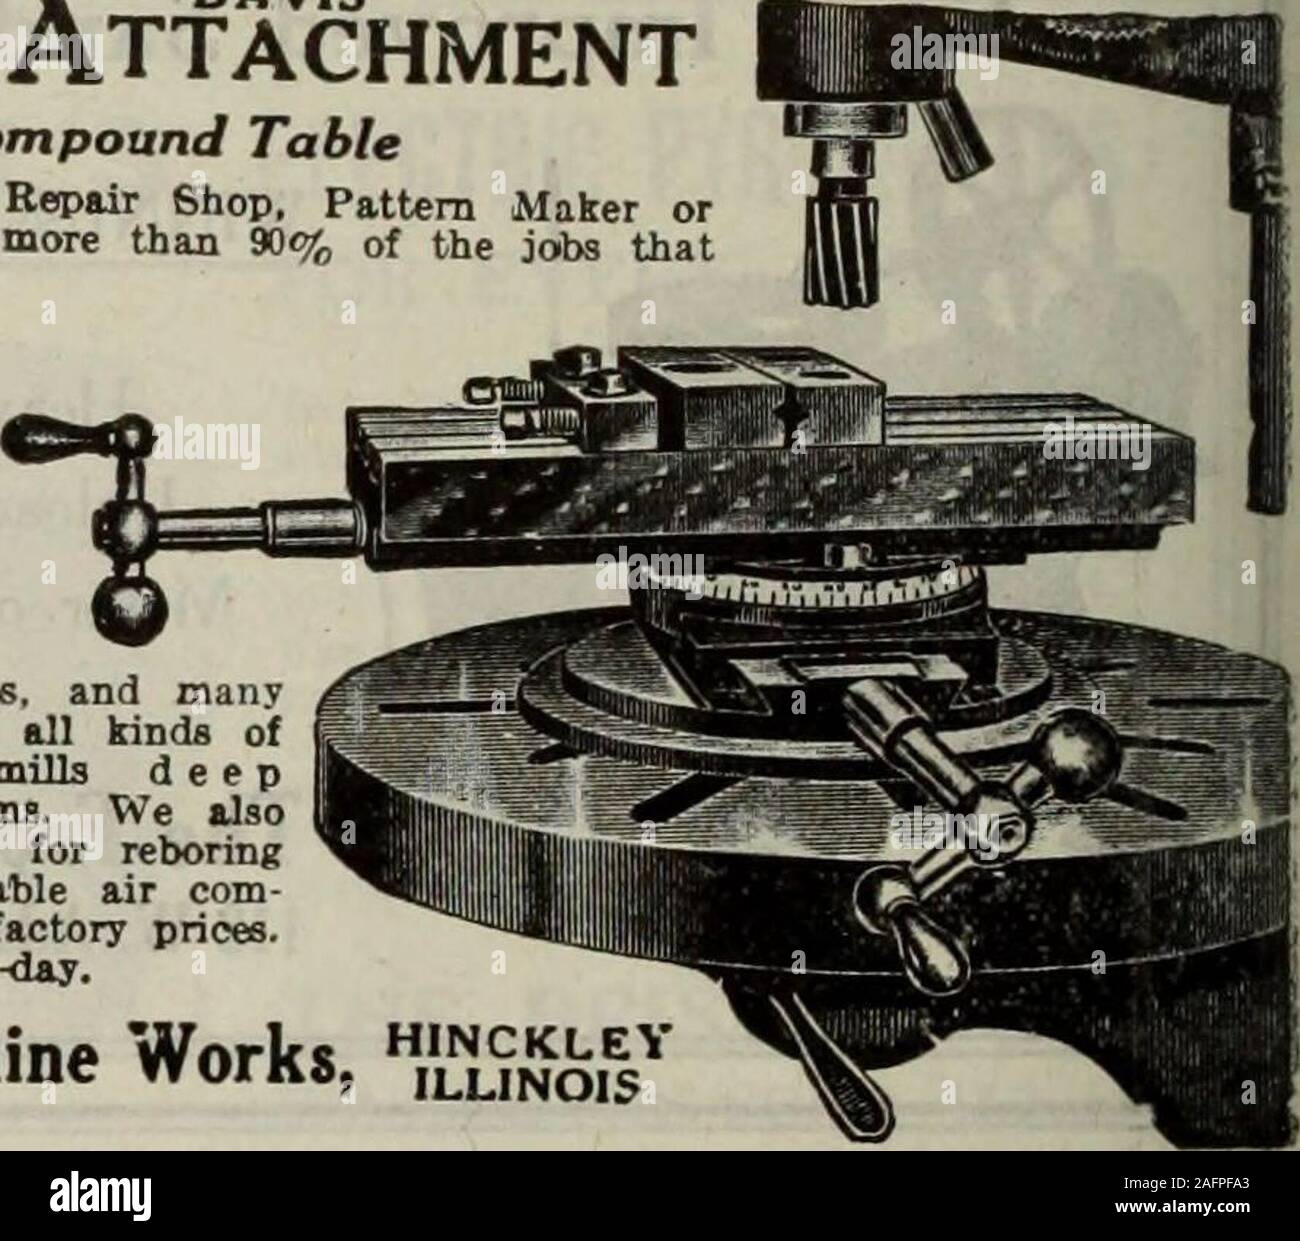 . Canadian machinery and metalworking (January-June 1919). Milling Attachment and Compound Table For the Die Maker, Repair Shop, Pattern Maker ori,arage; will perform more than 90% of the jobs thatcome up. For any Drill Press14 to 42 swing.Big Economy — BigConvenience— SmallPrice. It relievesyour large millers,comes in handye p o tting castings,milling ends of bosses, and manyorher odd jobs. Cuts all kinds ofkeyseats perfectly; mills deepgrooves, slots and cams. We alsomake cylinder reamers for reboringFord car, and a reliable air com-pressor—all at special factory prices.Write for circulars t Stock Photo